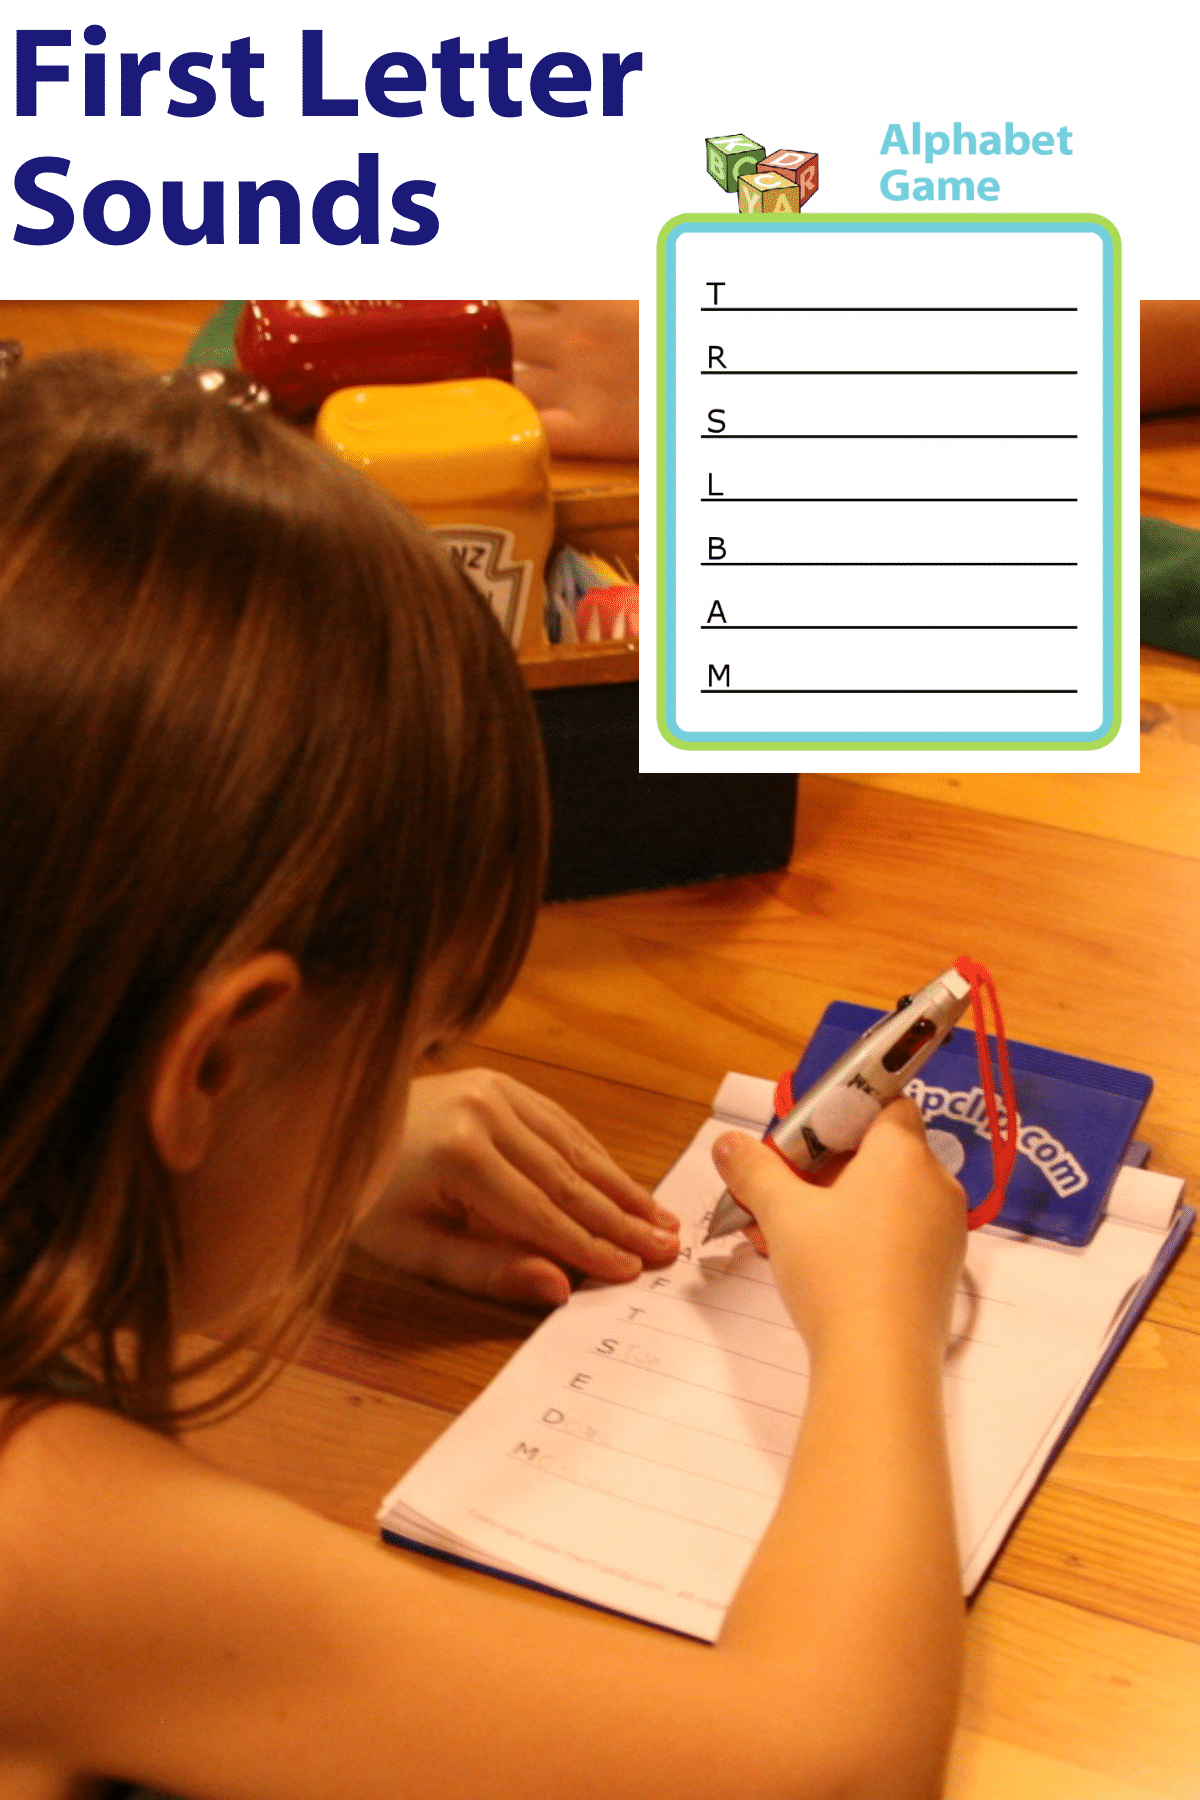 Alphabet Game: Blank lines with a capital letter at the beginning of each.